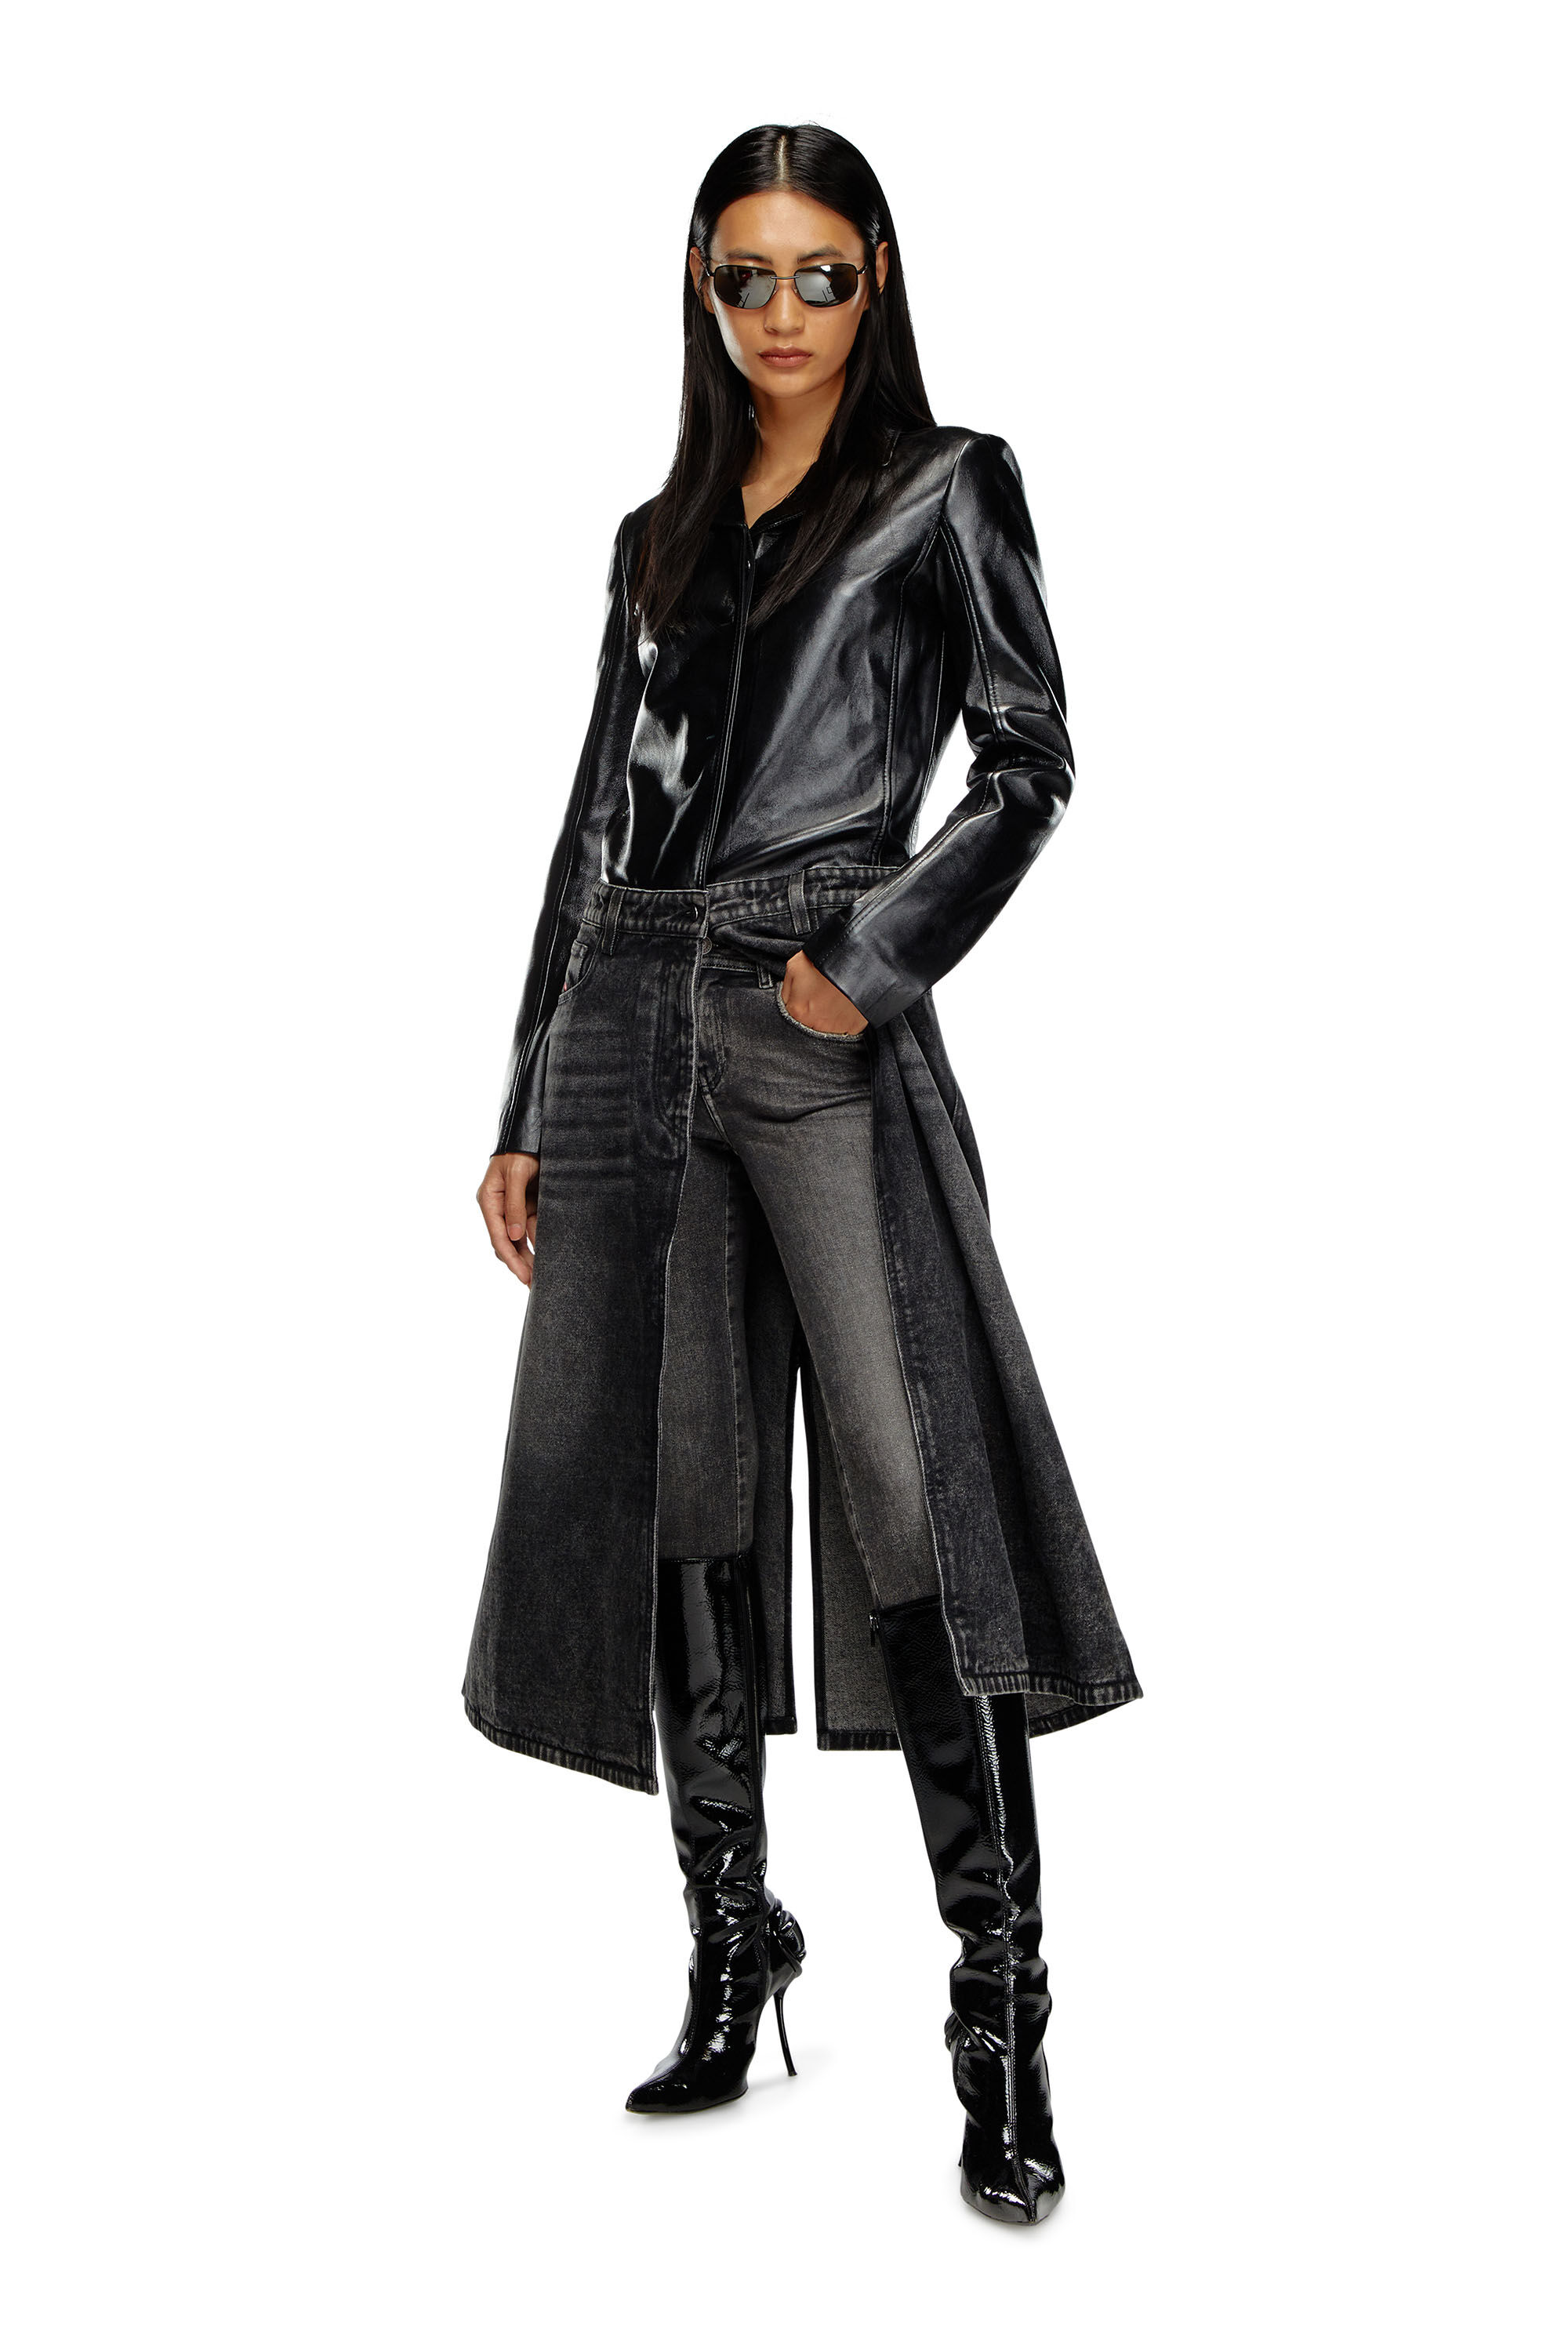 Diesel - L-ORY, Female Hybrid coat in denim and leather in ブラック - Image 3